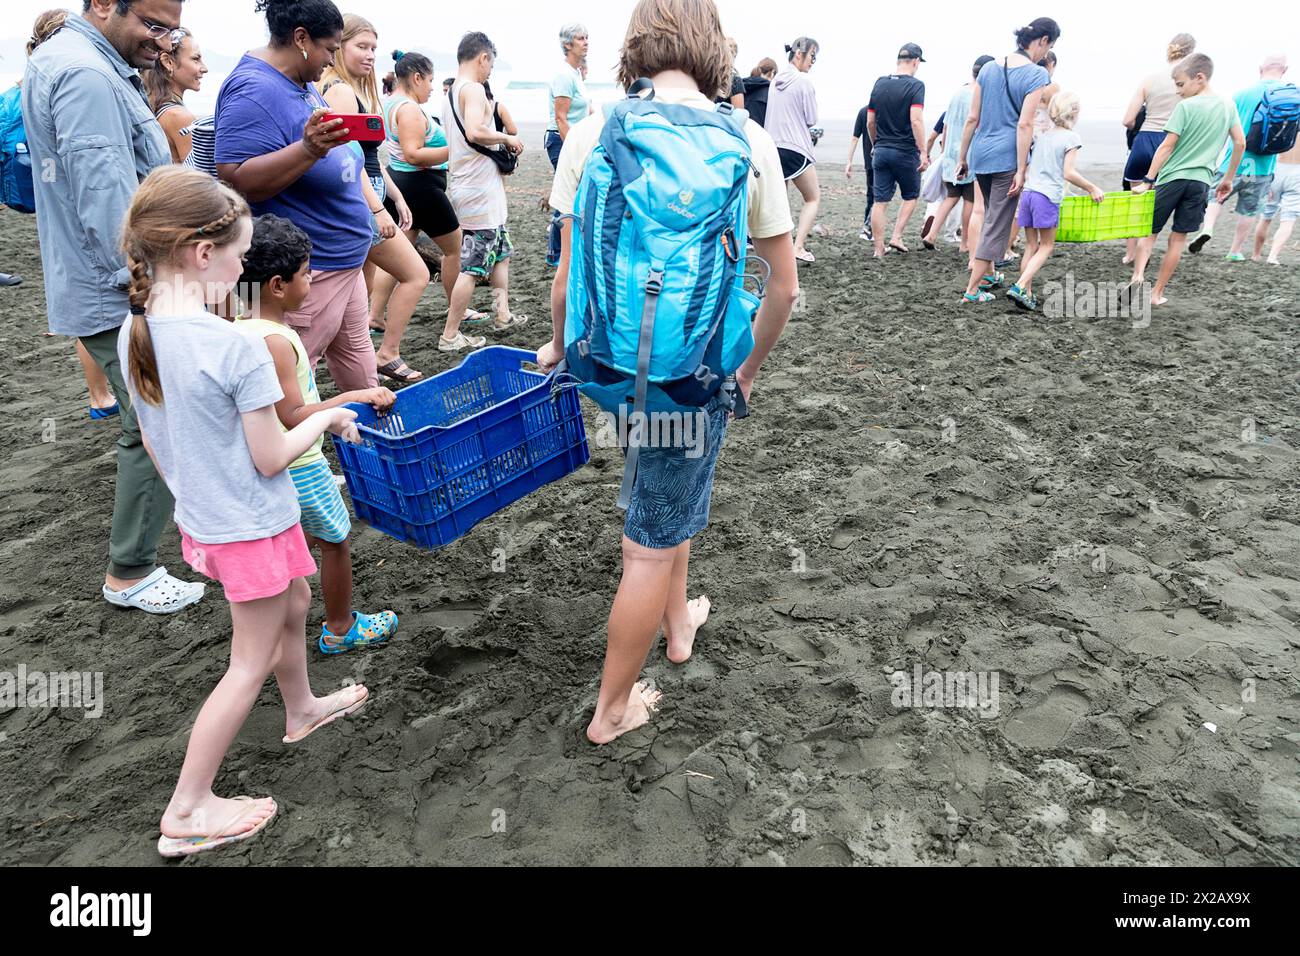 Tourists kids carrying baby Olive ridley turtles (Lepidochelys olivacea), Laura turtles in boxes to release them to ocean, Damas island, Costa rica Stock Photo